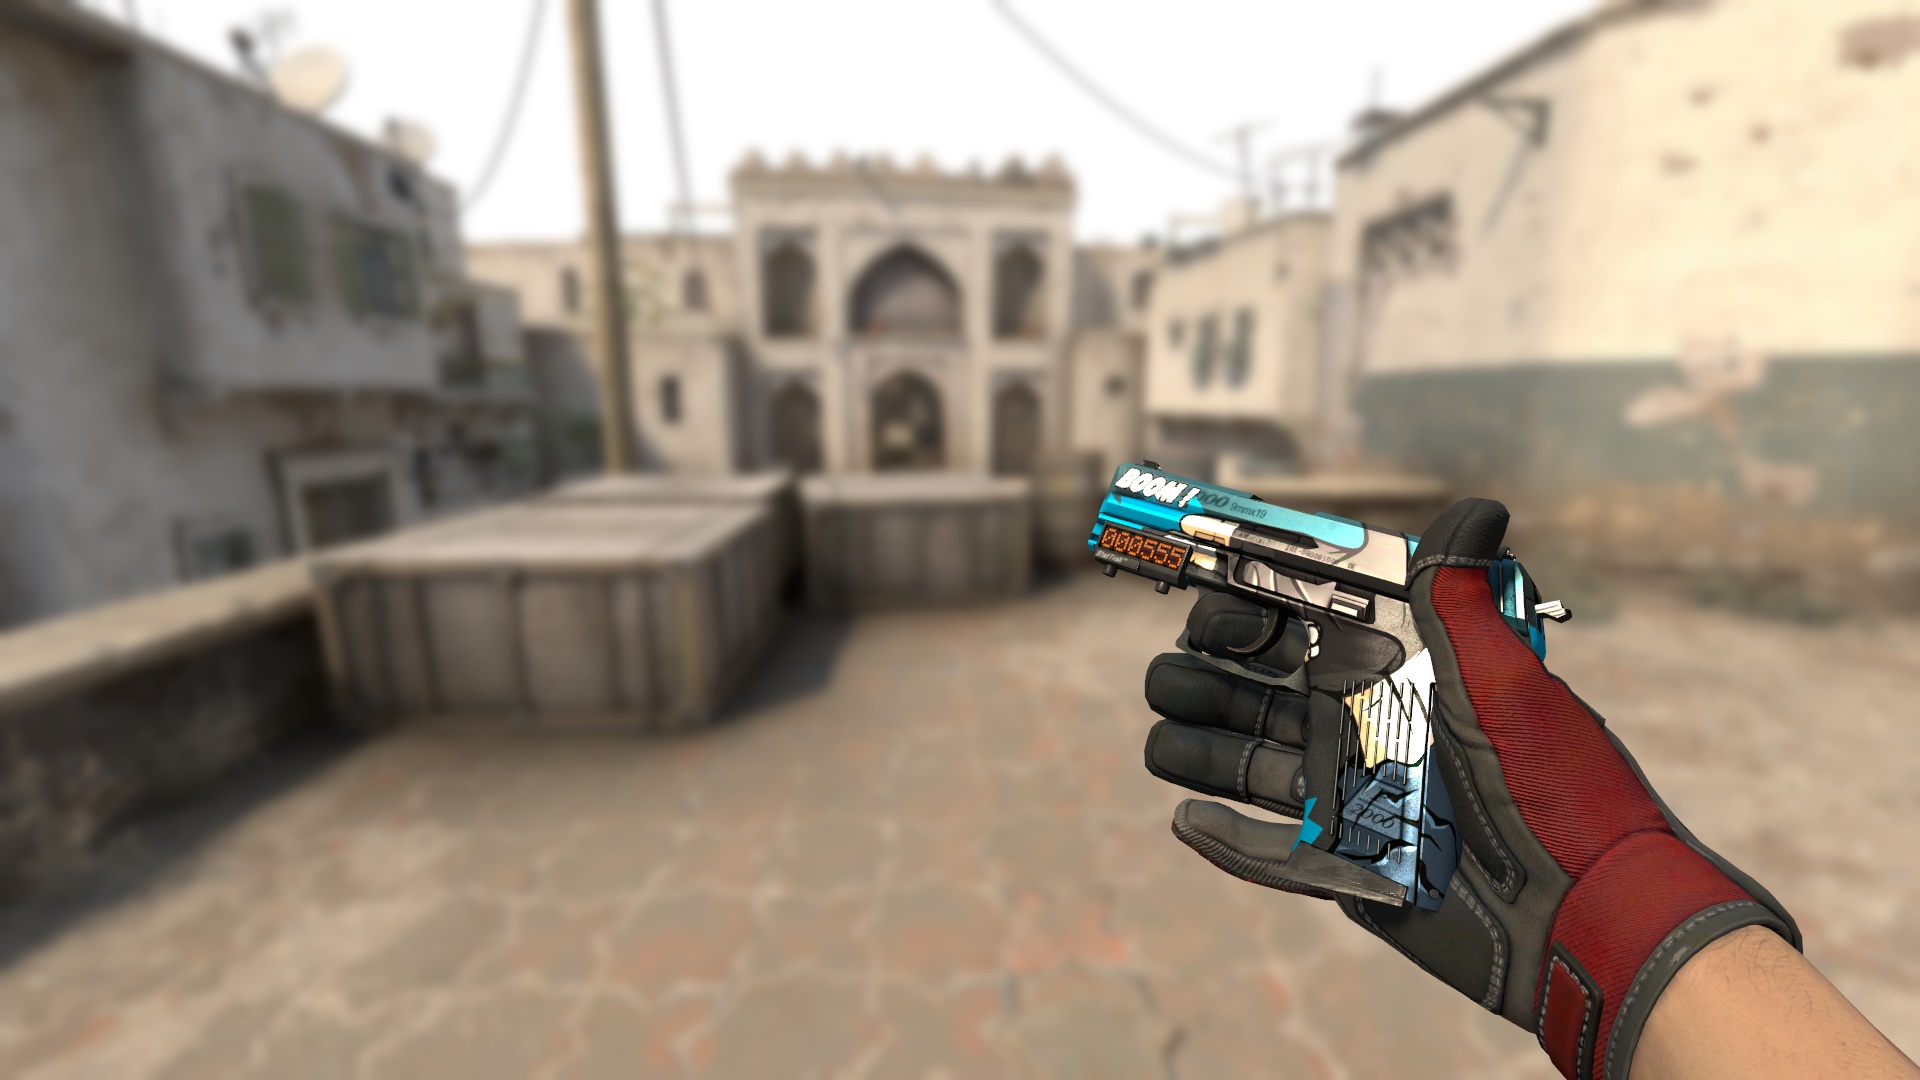 P2000 Ivory cs go skin download the last version for windows